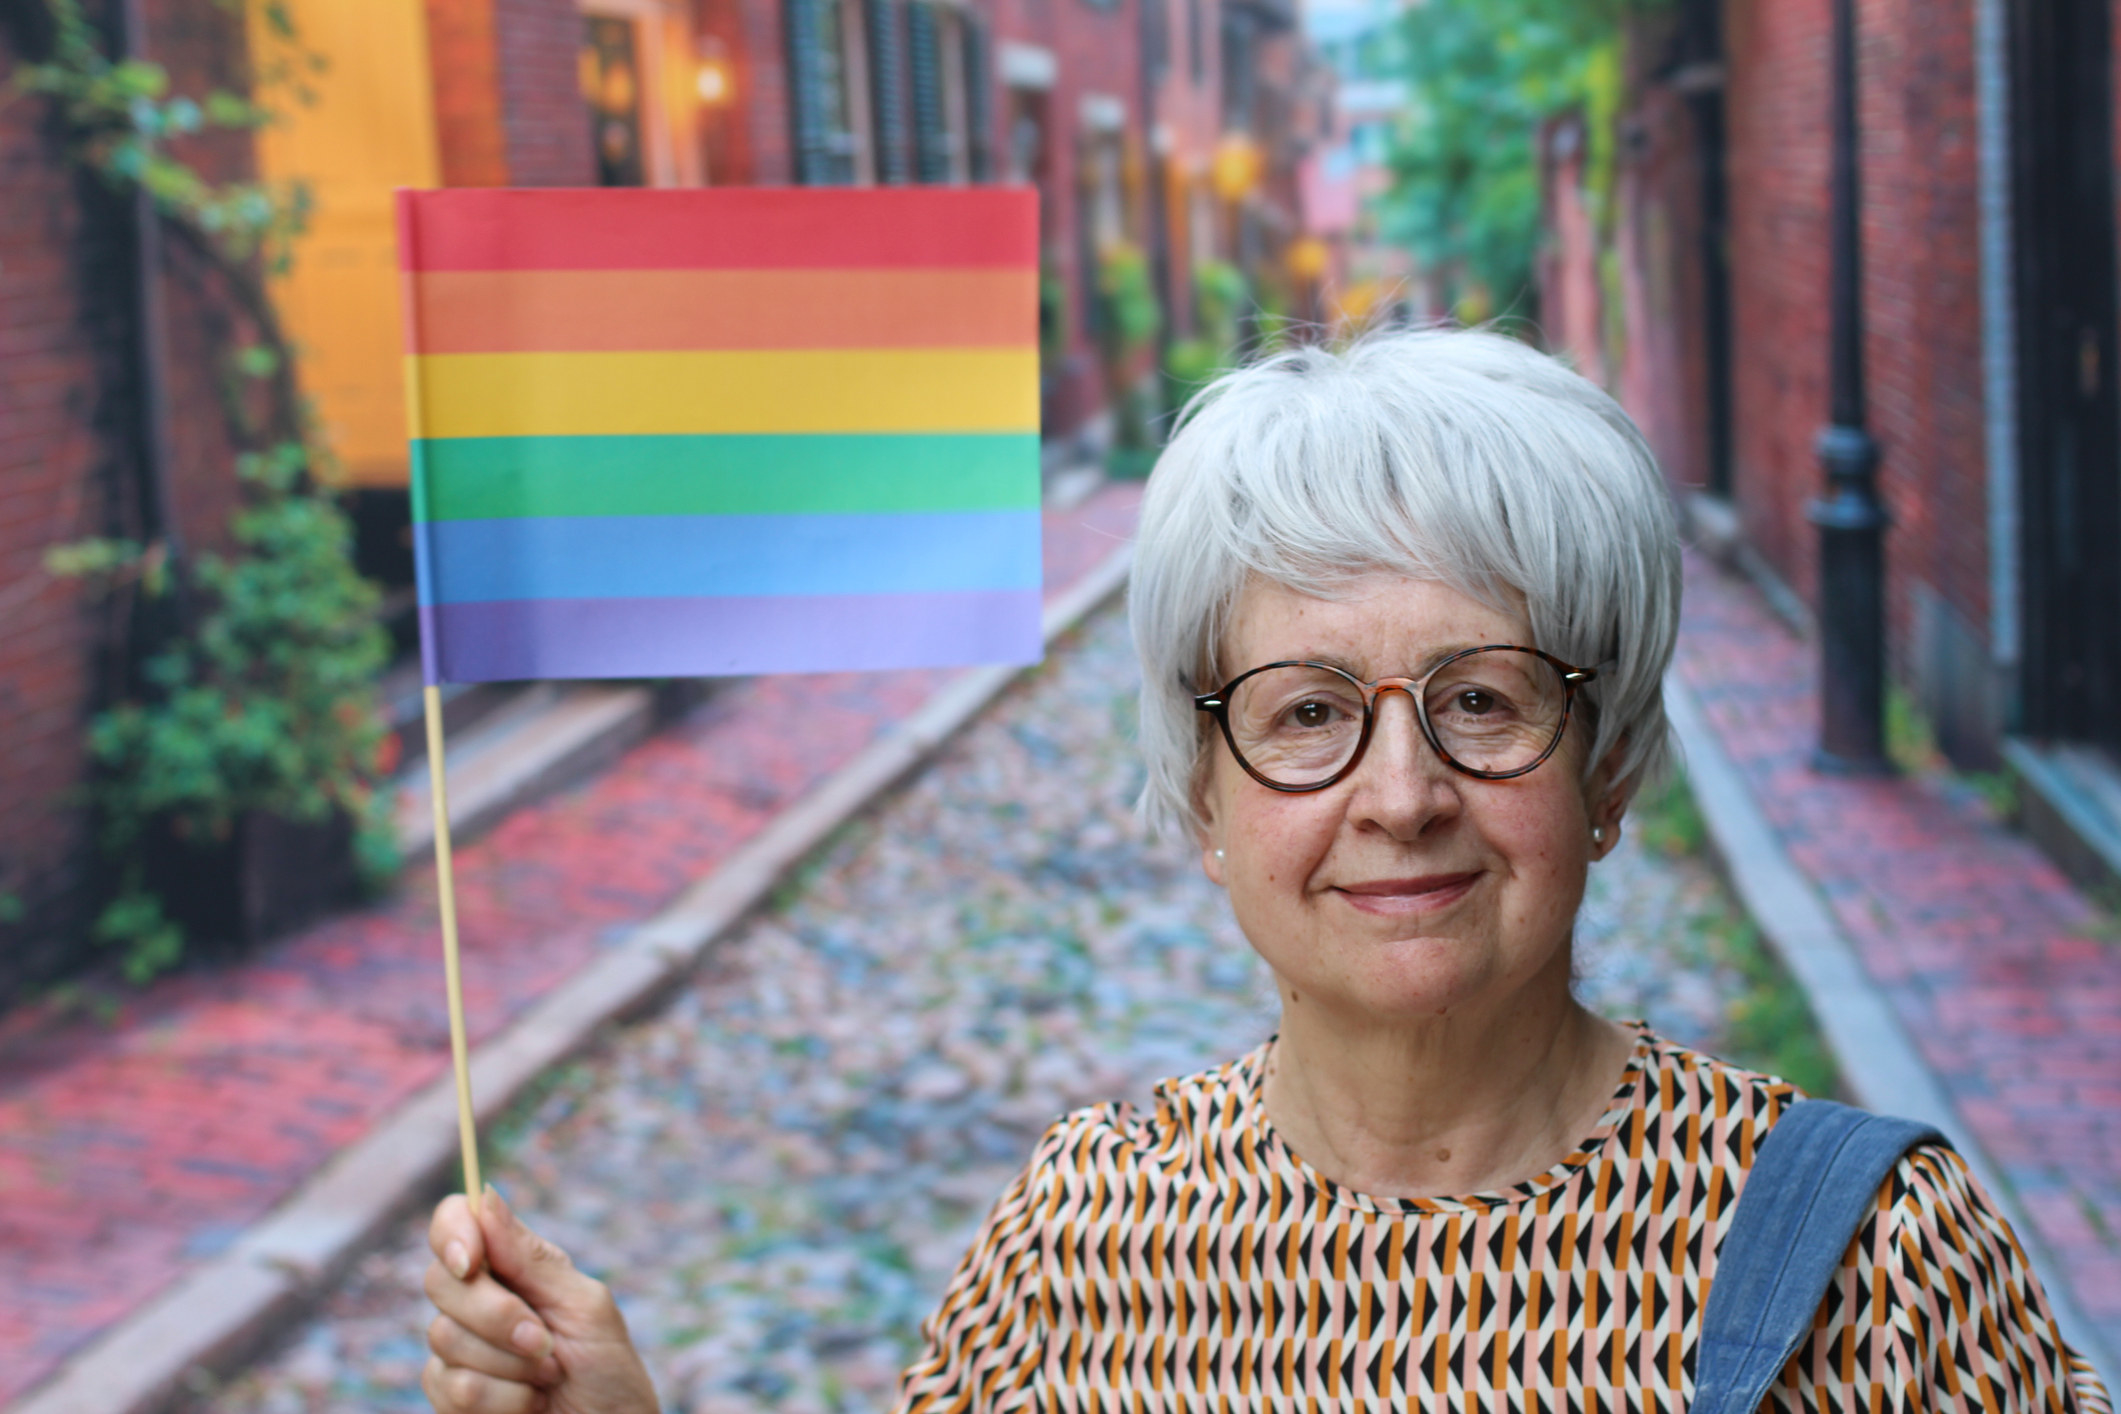 The same older woman from the first photo in this post holding a Pride flag outside